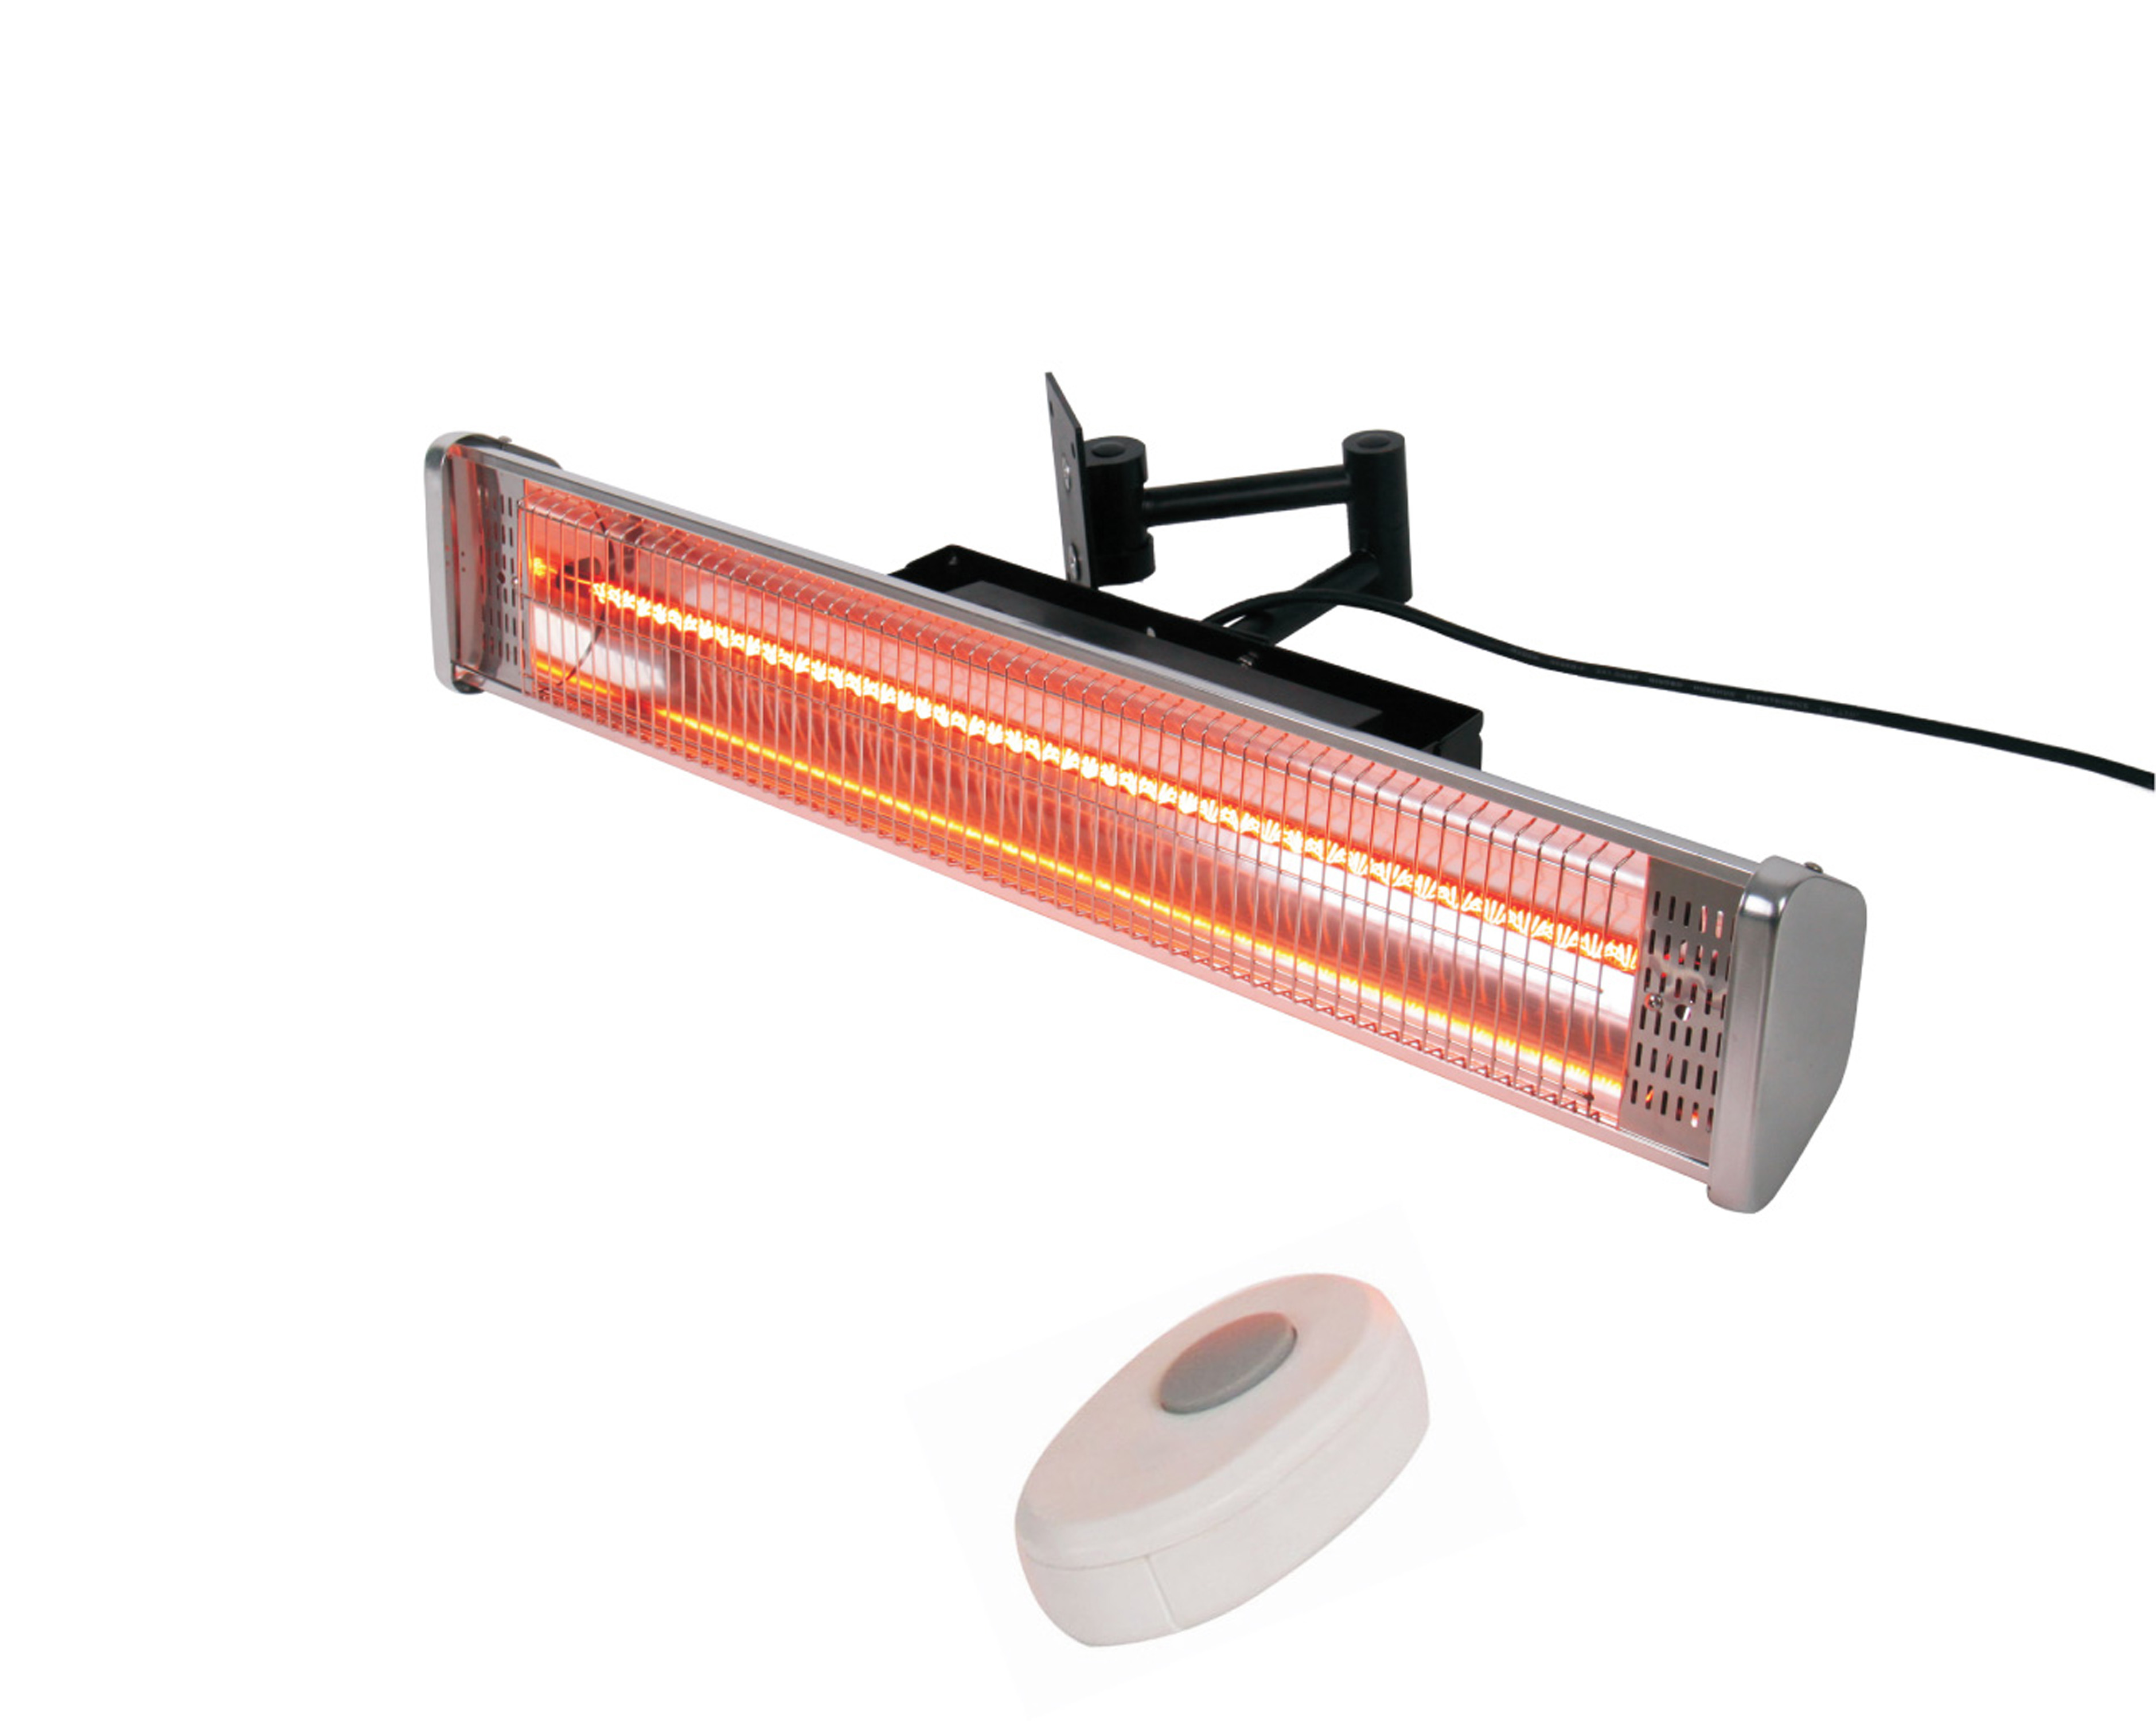 Hiland Electric Wall Mount Infrared Heat Lamp in White - image 1 of 2